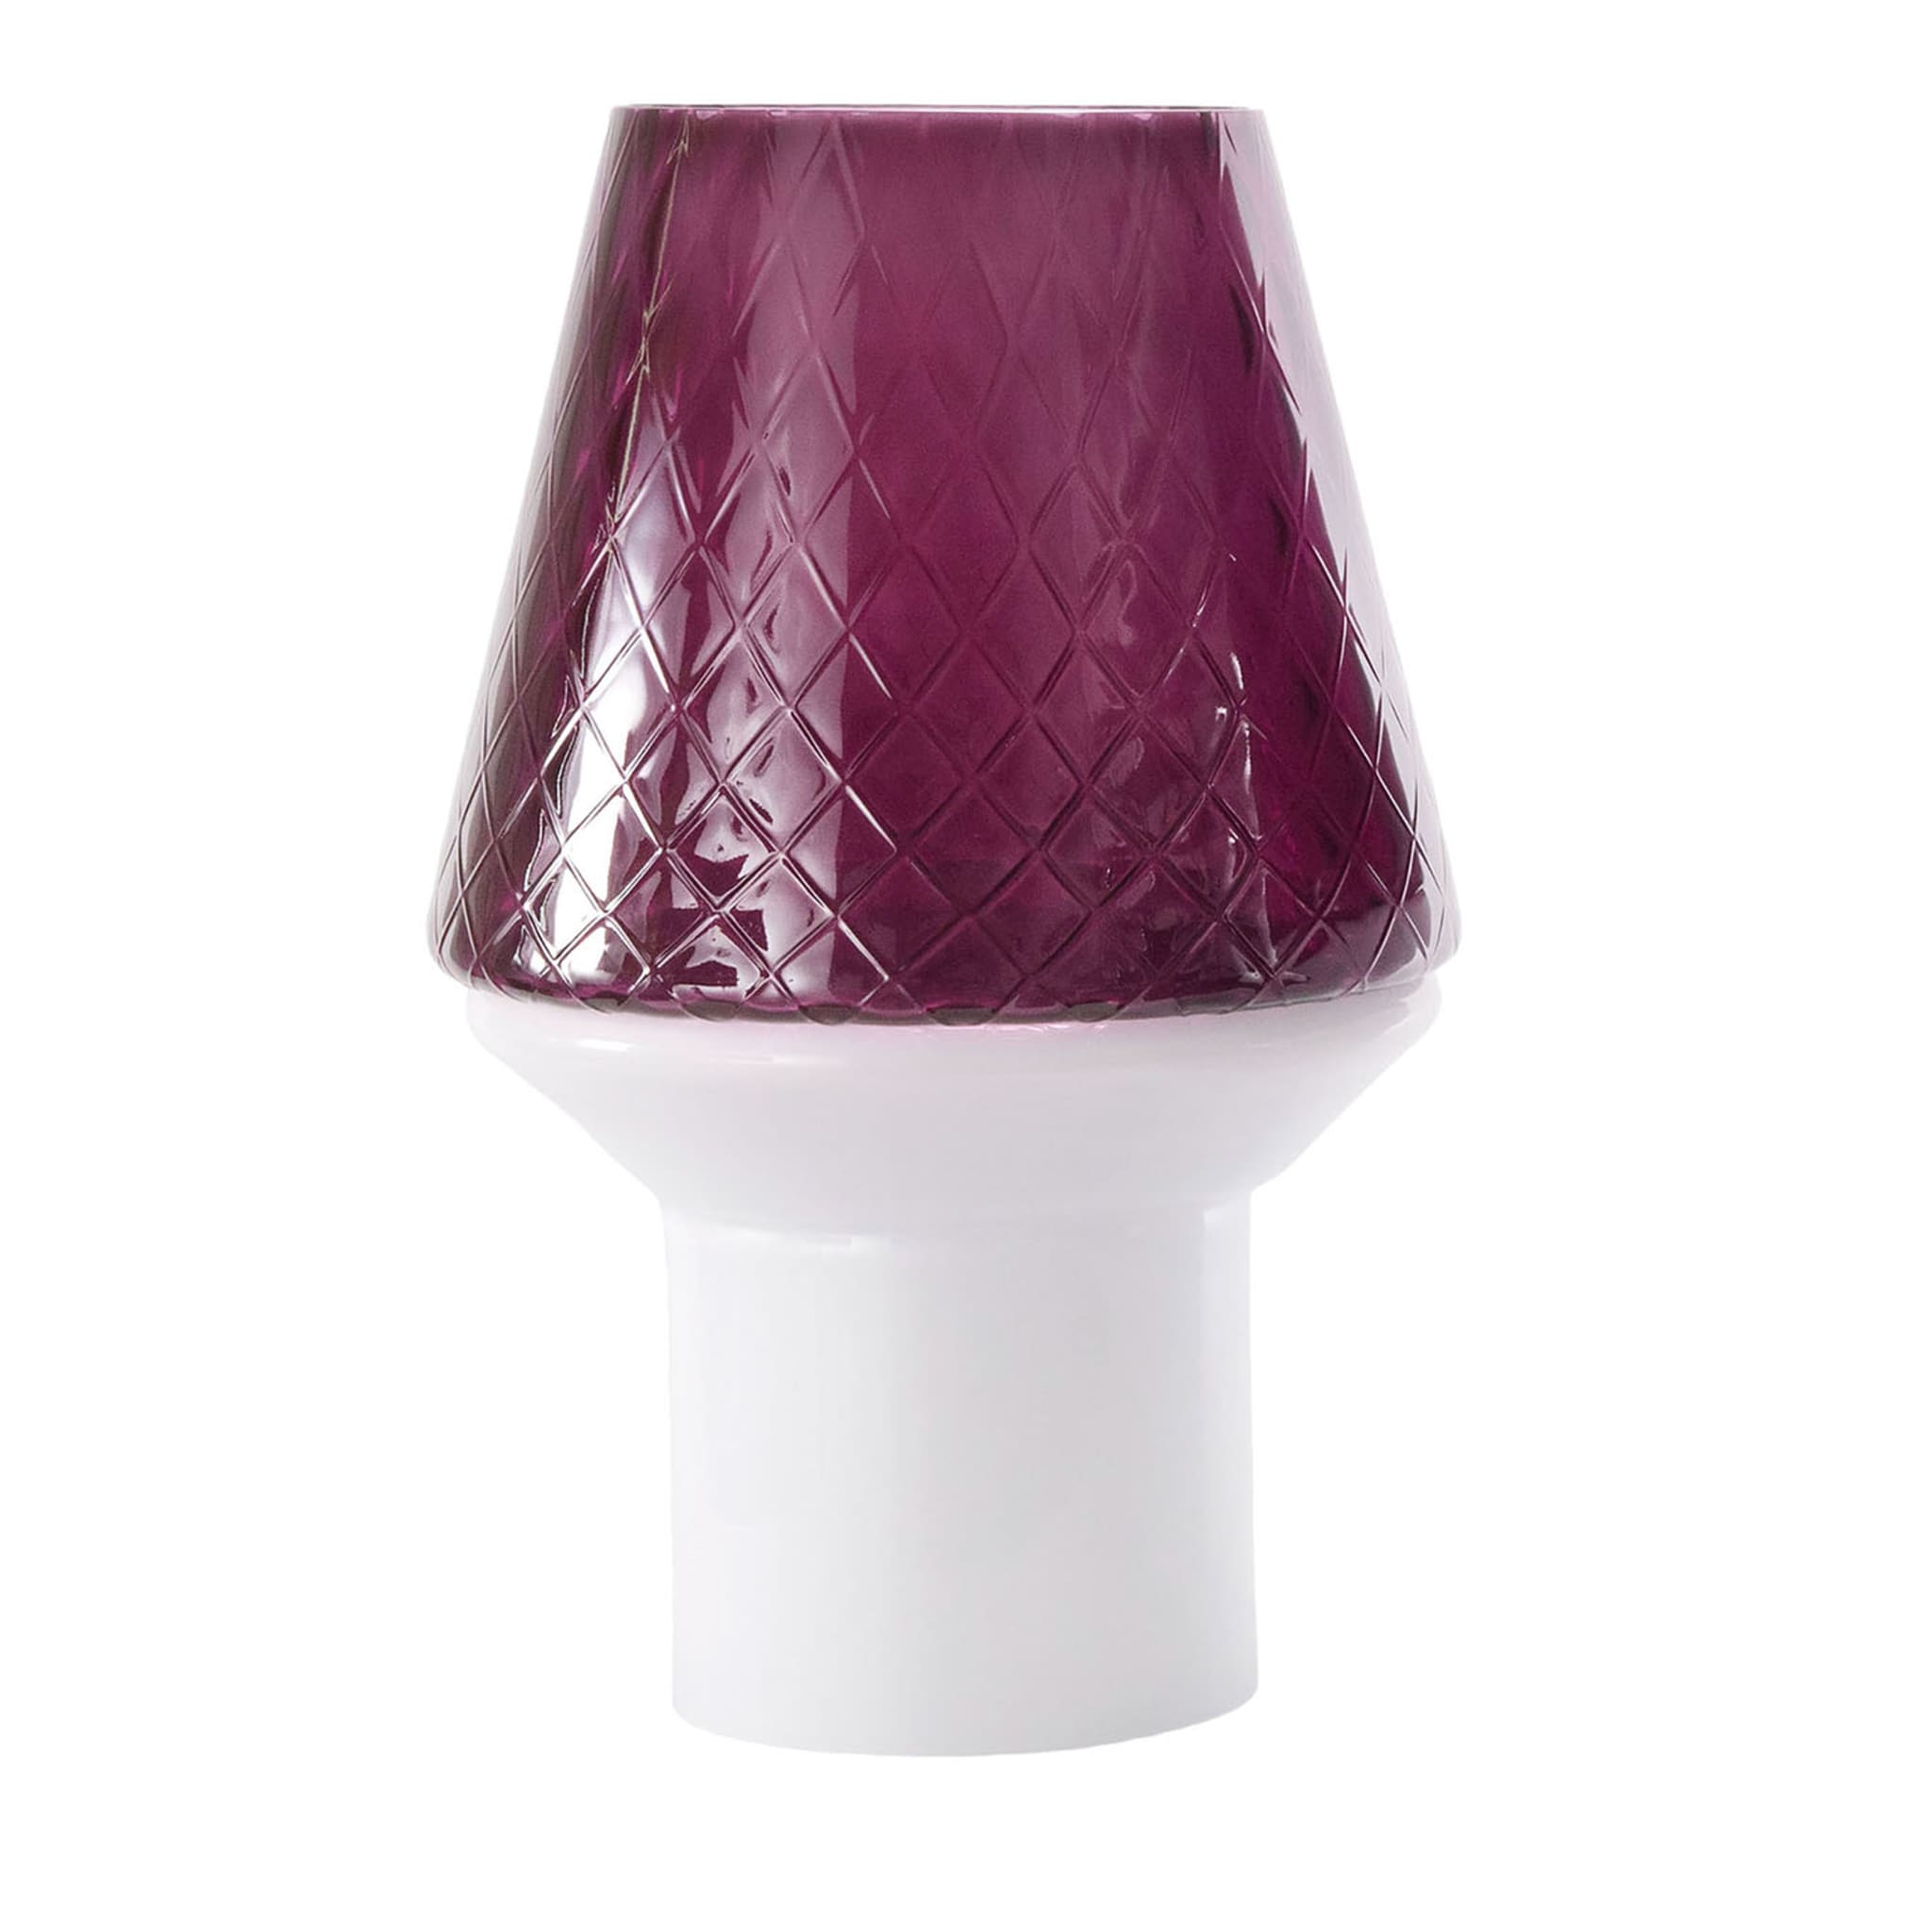 Forest Purple Table Lamp by Romani Saccani #2 - Main view